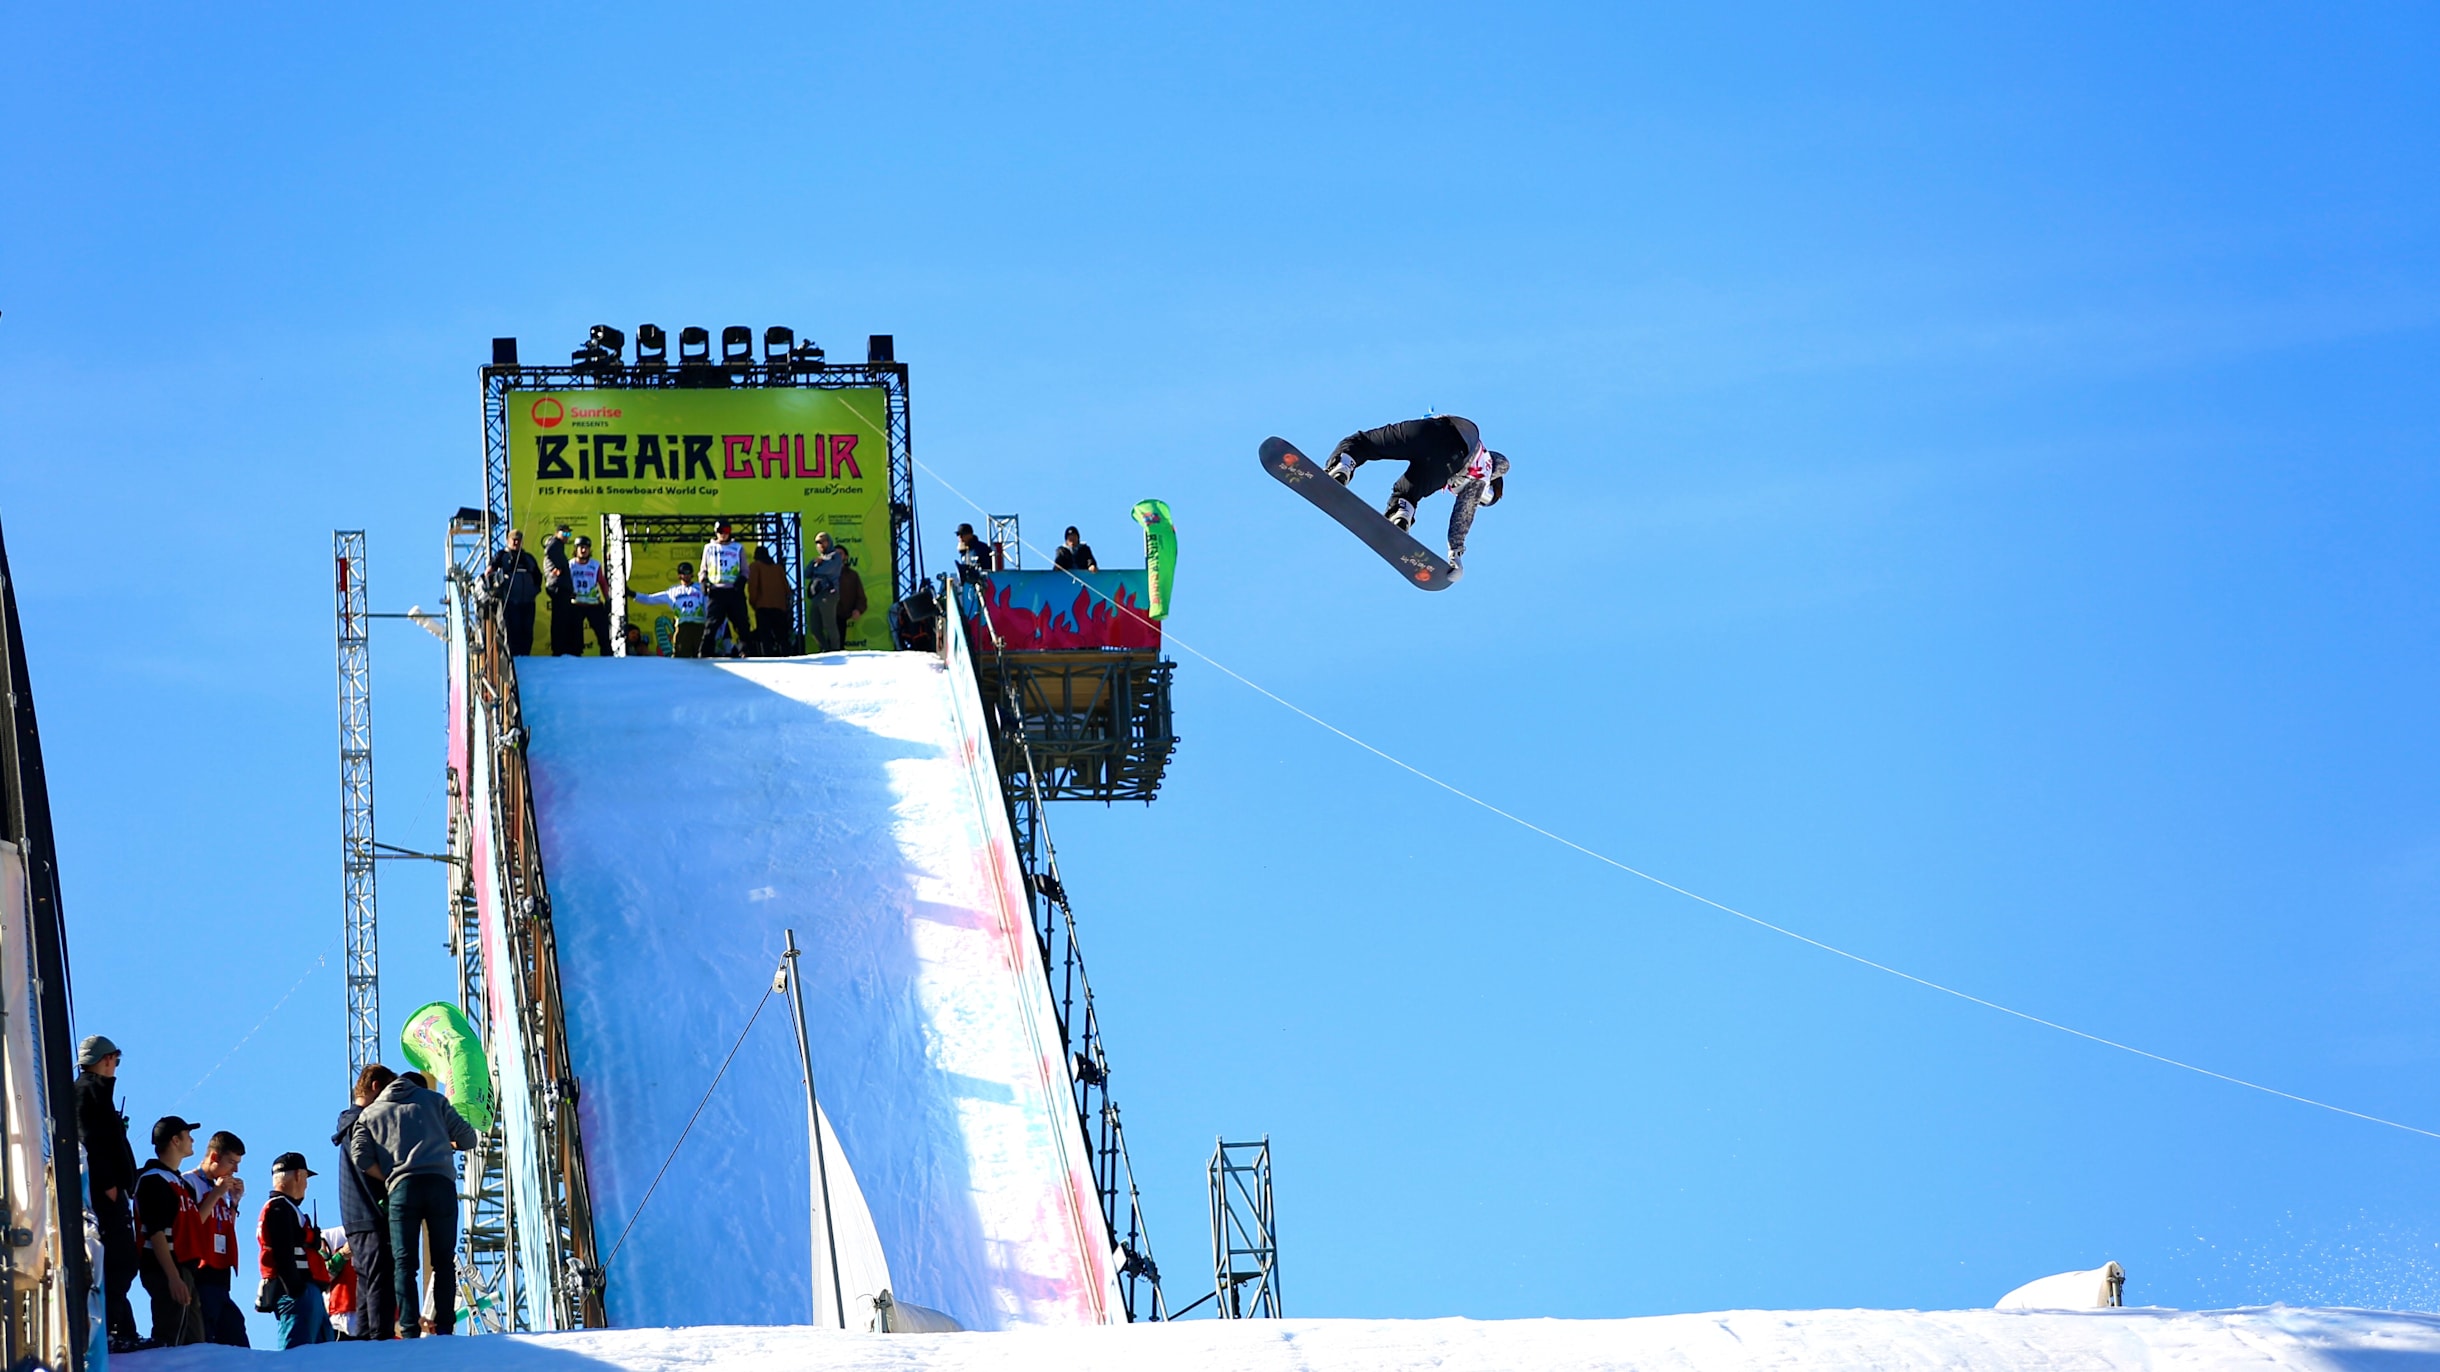 Snowboard Big Air 2022/23 season preview, stars to watch, and schedule of events